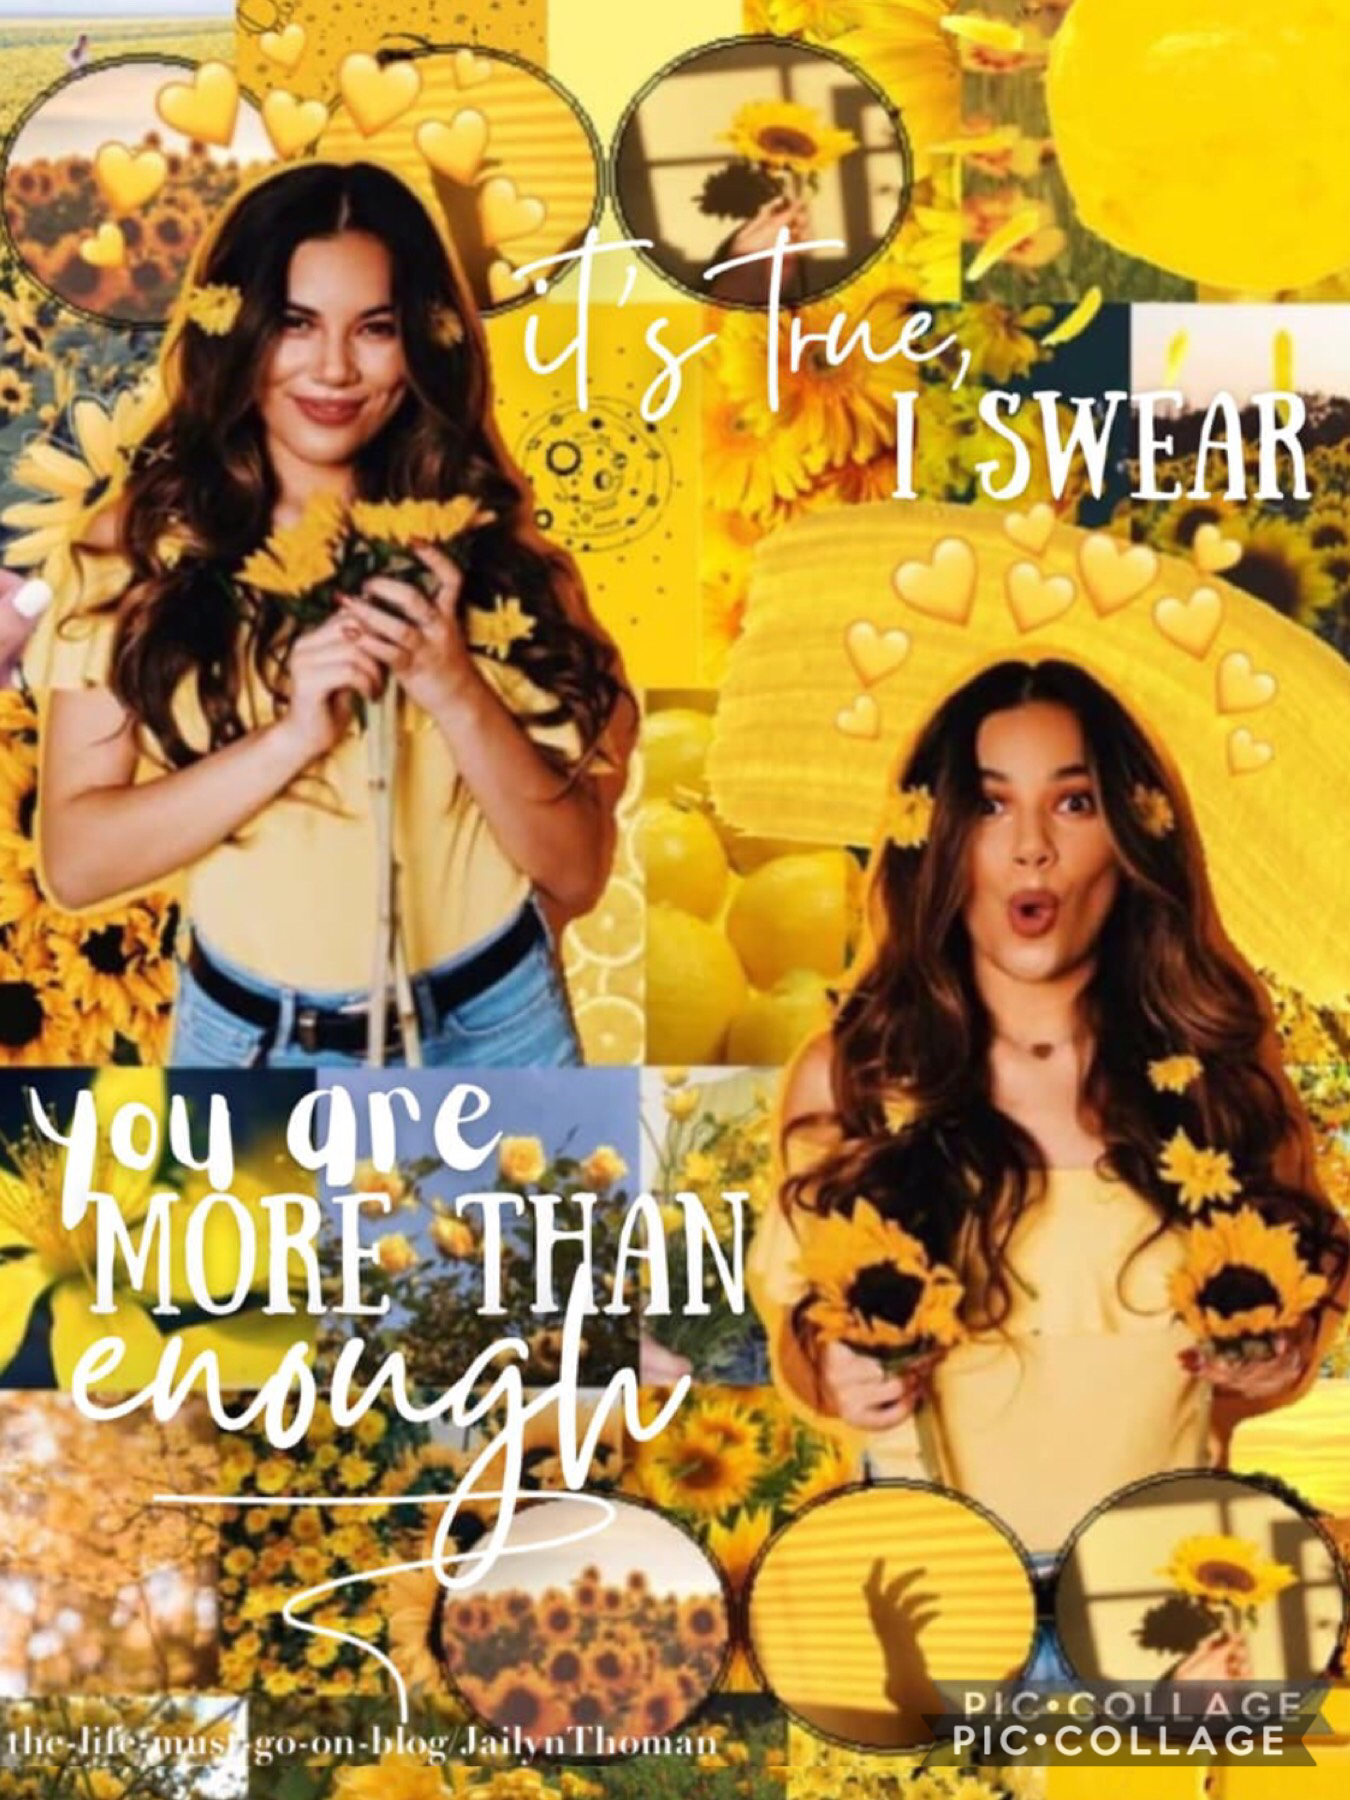 💛TAP💛
This is a collab with... the-life-must-go-on-blog! Go follow her she is the best! This collage is to try and stop self h8! If you need anyone to talk to I’ll be here! (5/7/21)